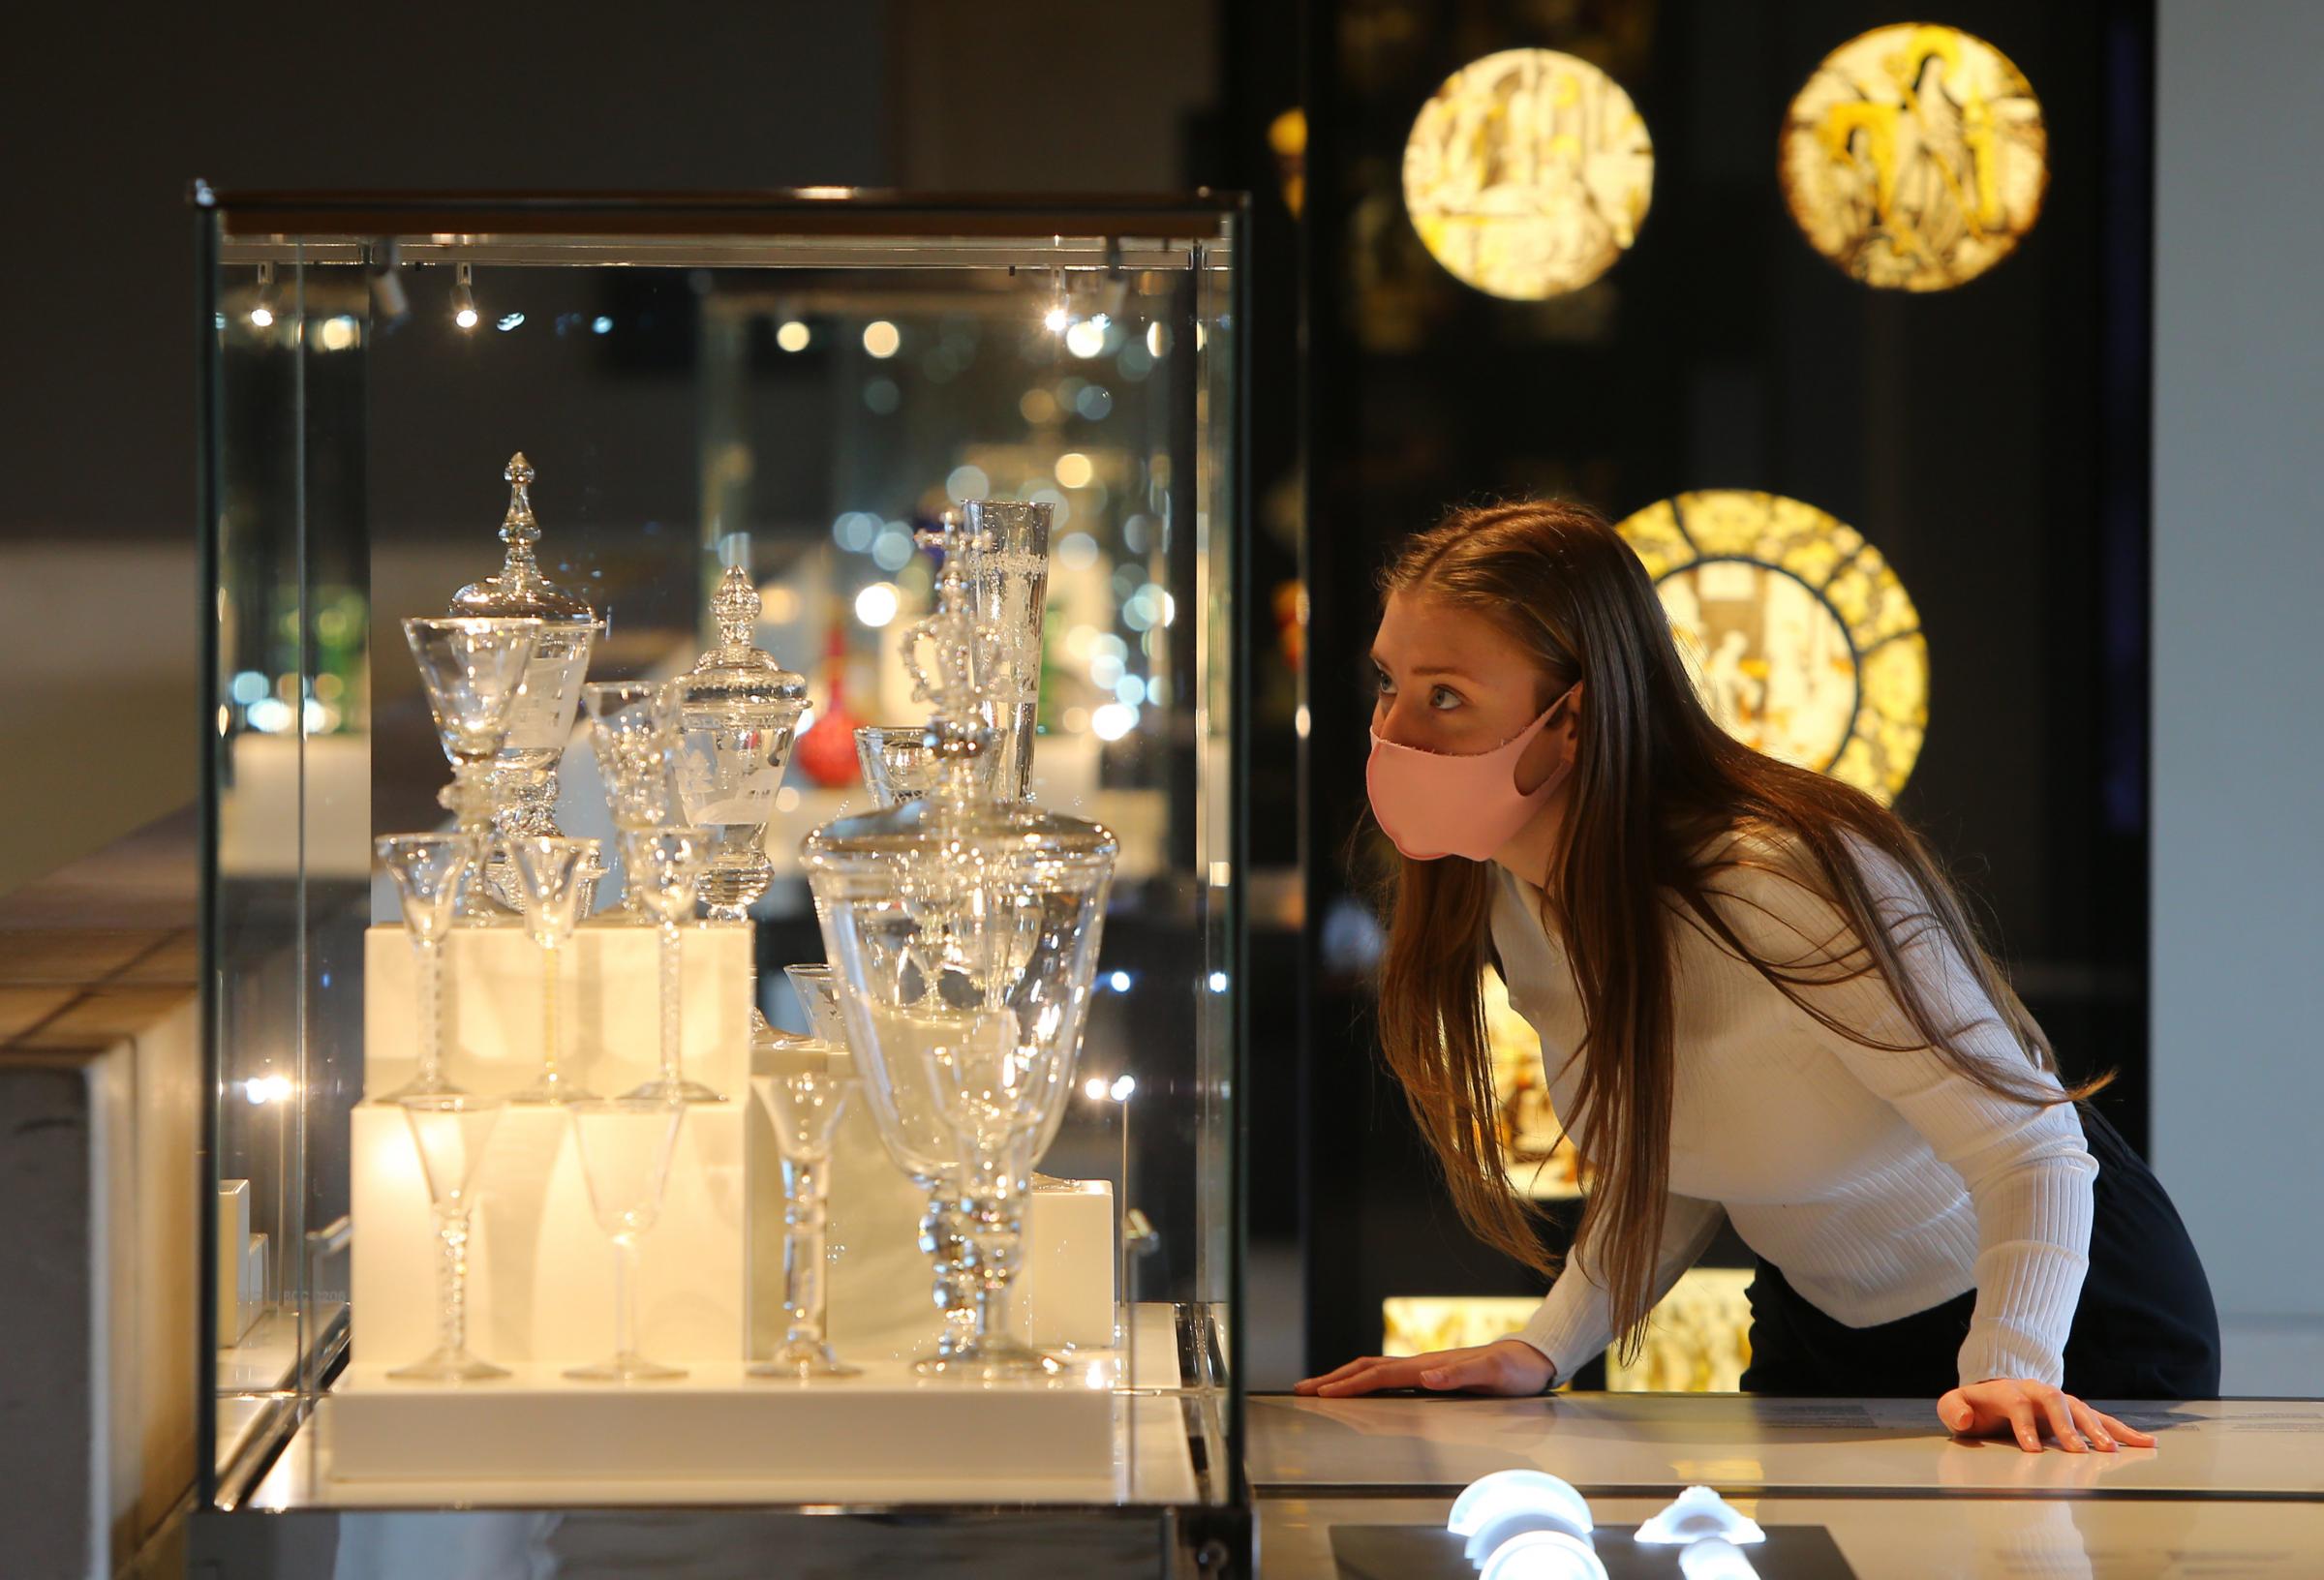 Burrell staff member Kirsty McAdam looking at a display of glass goblets. Photograph by Colin Mearns.